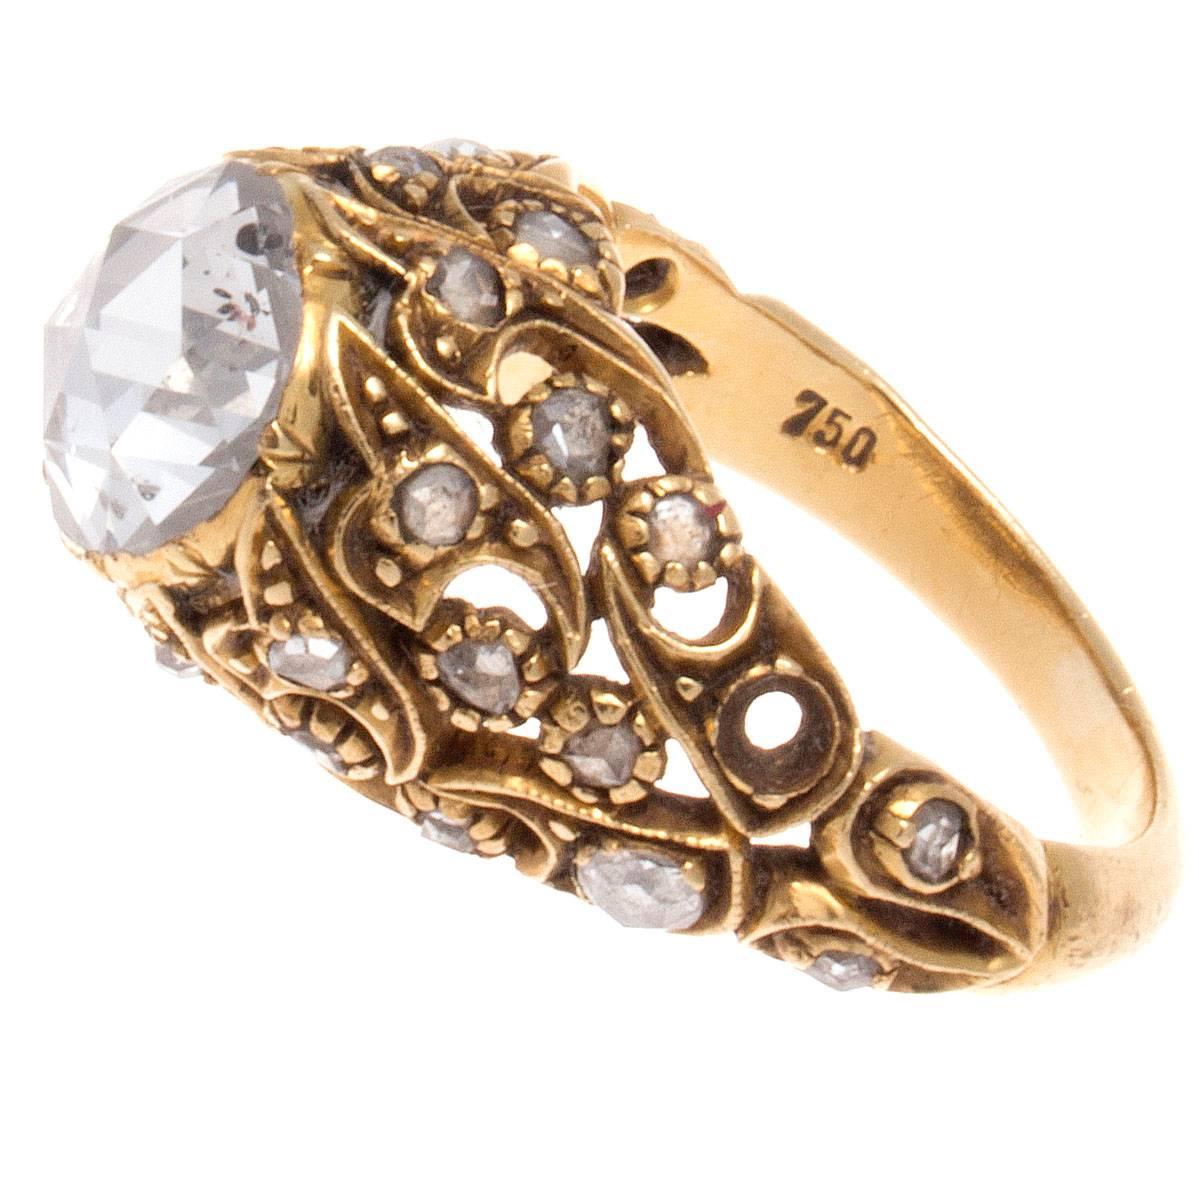 An elegant antique design from the early victorian era. Featuring an approximately 1.70 carat rose cut diamond that is elevated by intricately hand crafted 18k gold, with numerous matching rose cut diamonds. 

Ring size 6-3/4 and may be resized.